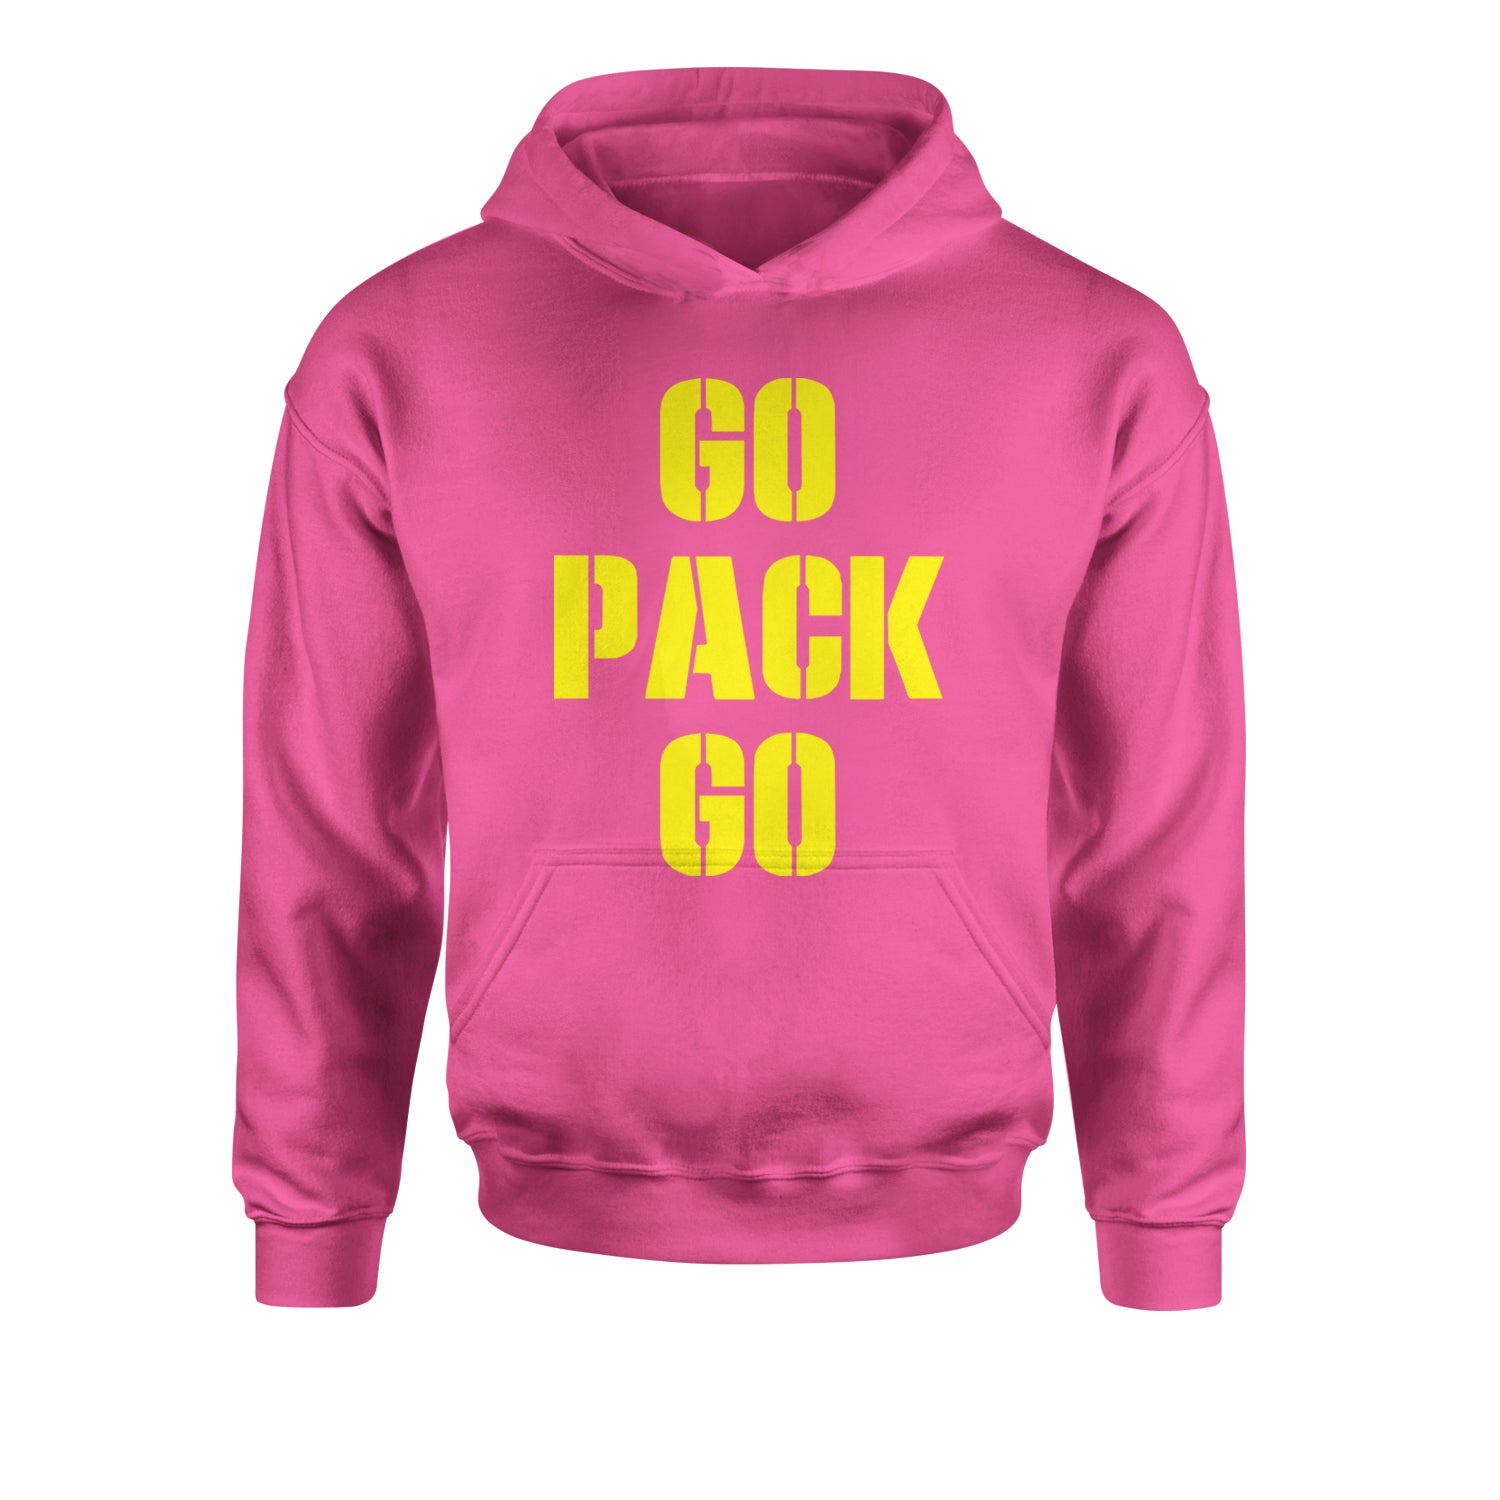 Go Pack Go Green Bay Youth-Sized Hoodie football, greenbay, packer by Expression Tees